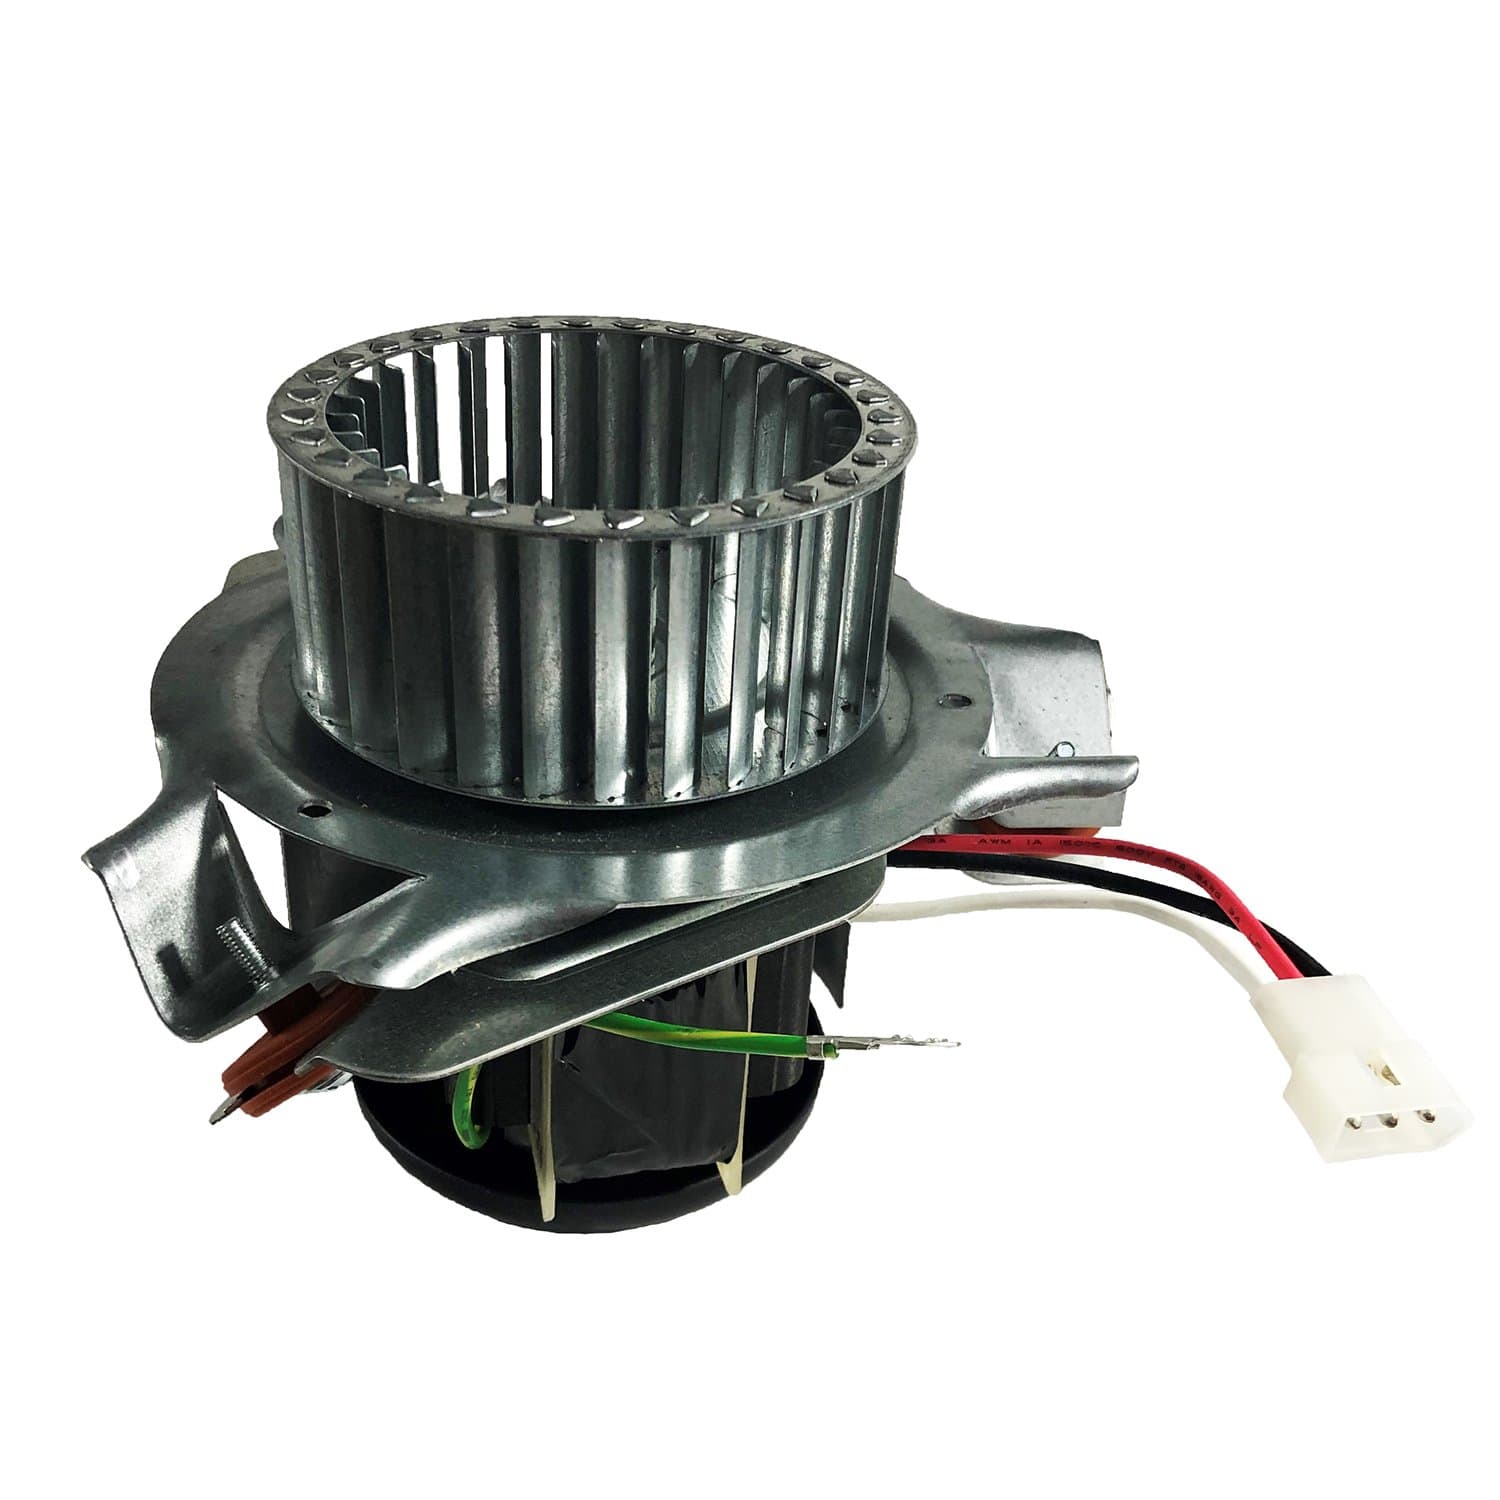 Packard 66762 Draft Inducer, 17/1.11W, 2 Speed, 1.06/0.28 Amps, 3000 RPM, 115 Volts